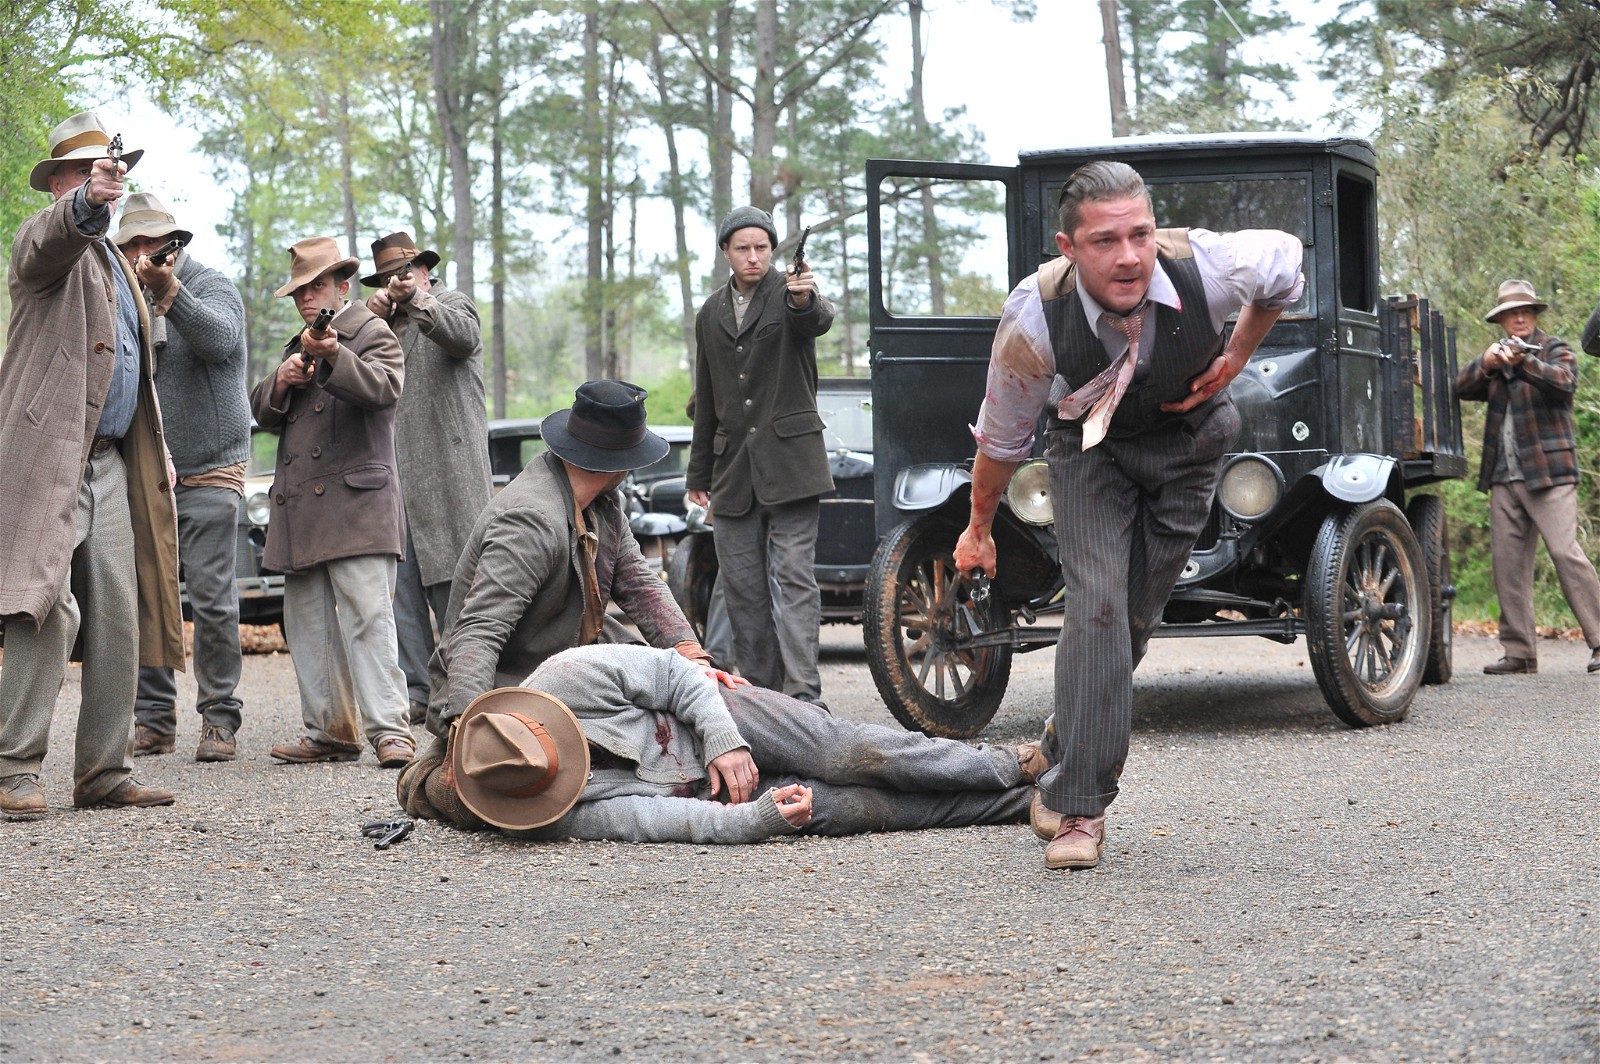 Shai LaBeouf in a still from Lawless (2012).